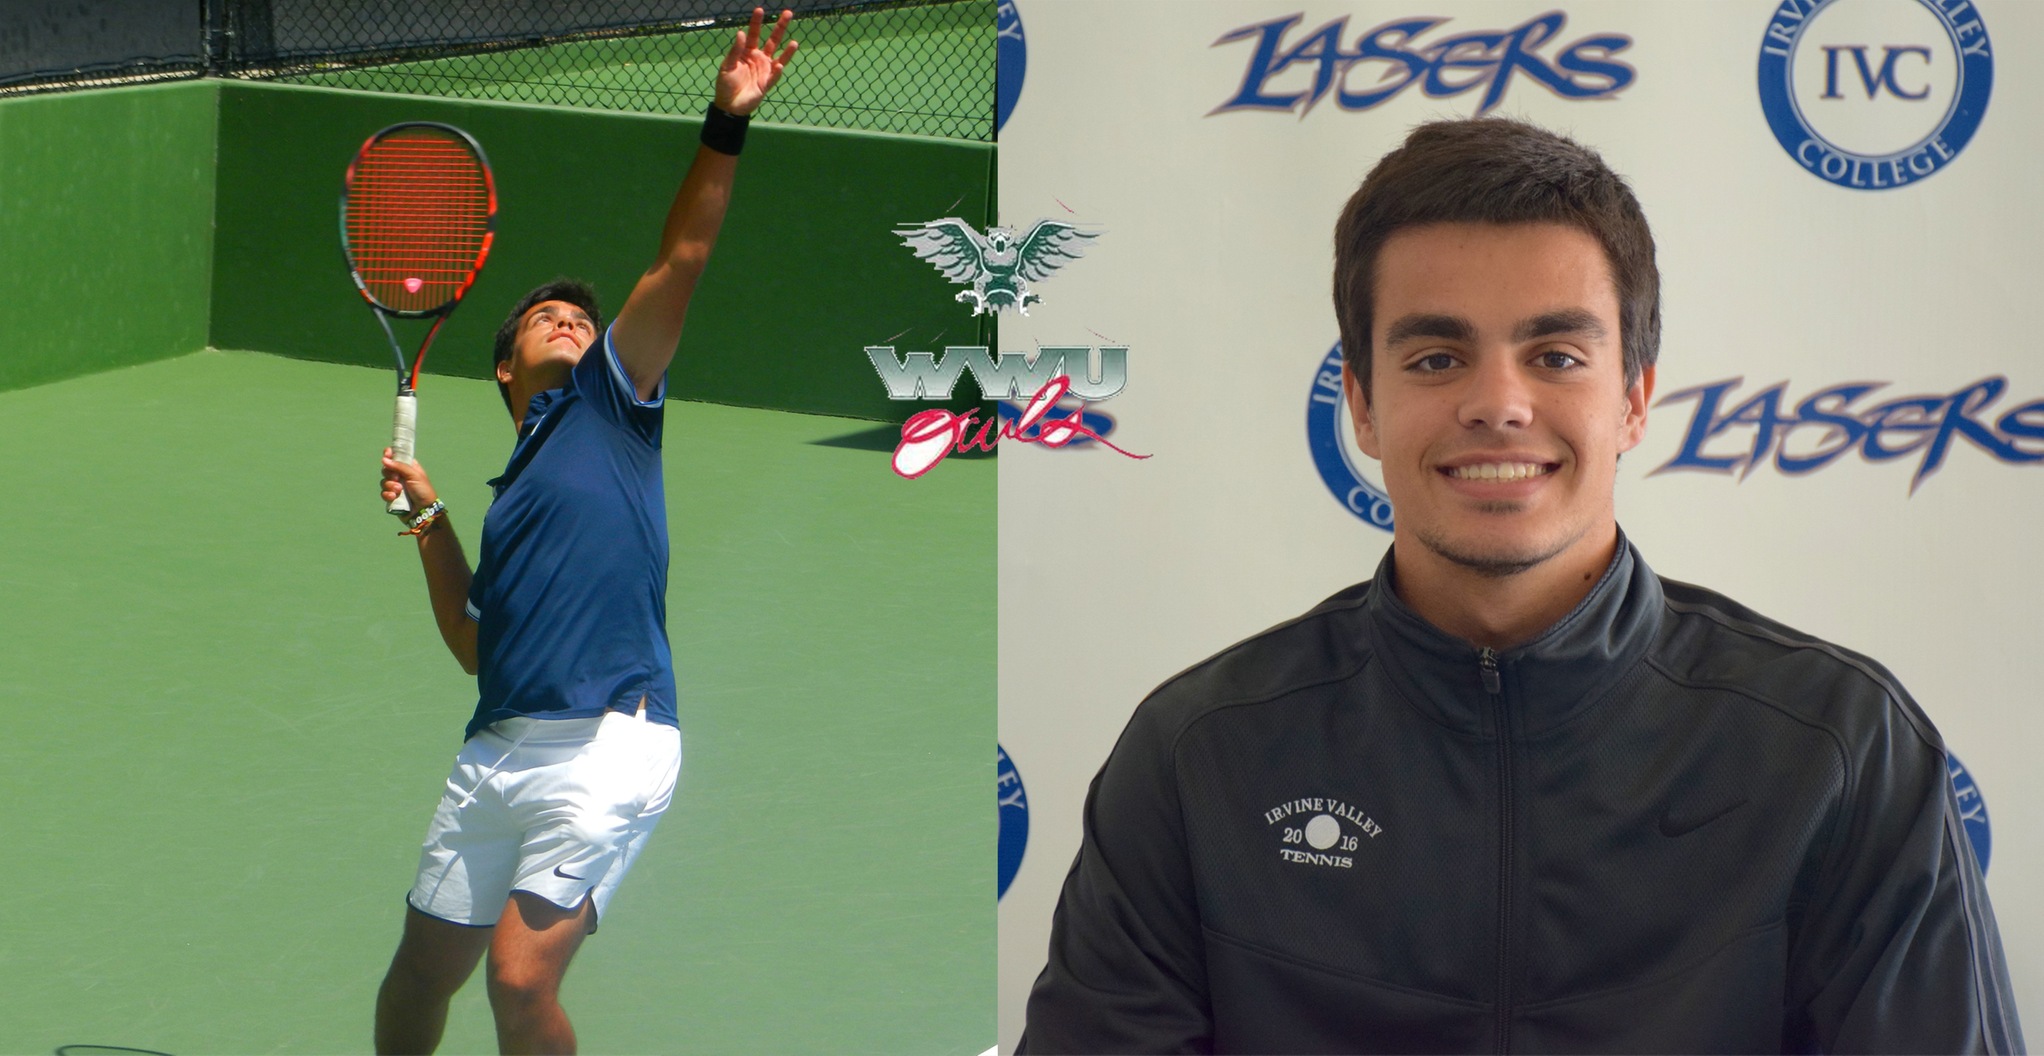 Former IVC star tennis player Javier Callejo named All-American